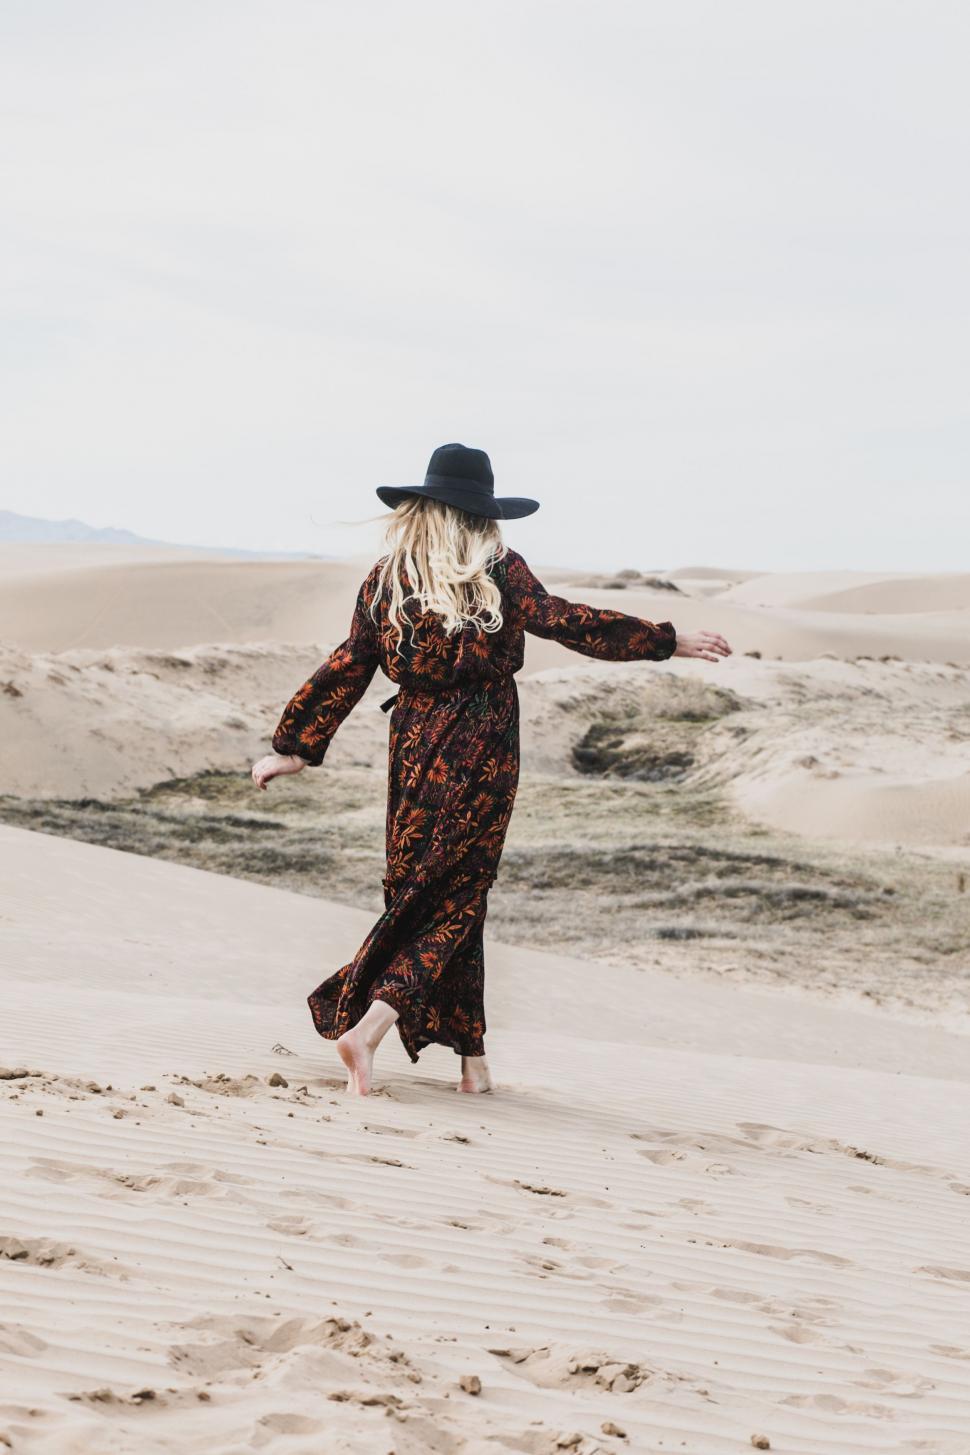 Free Image of Woman in Long Dress and Hat Walking in Sand 